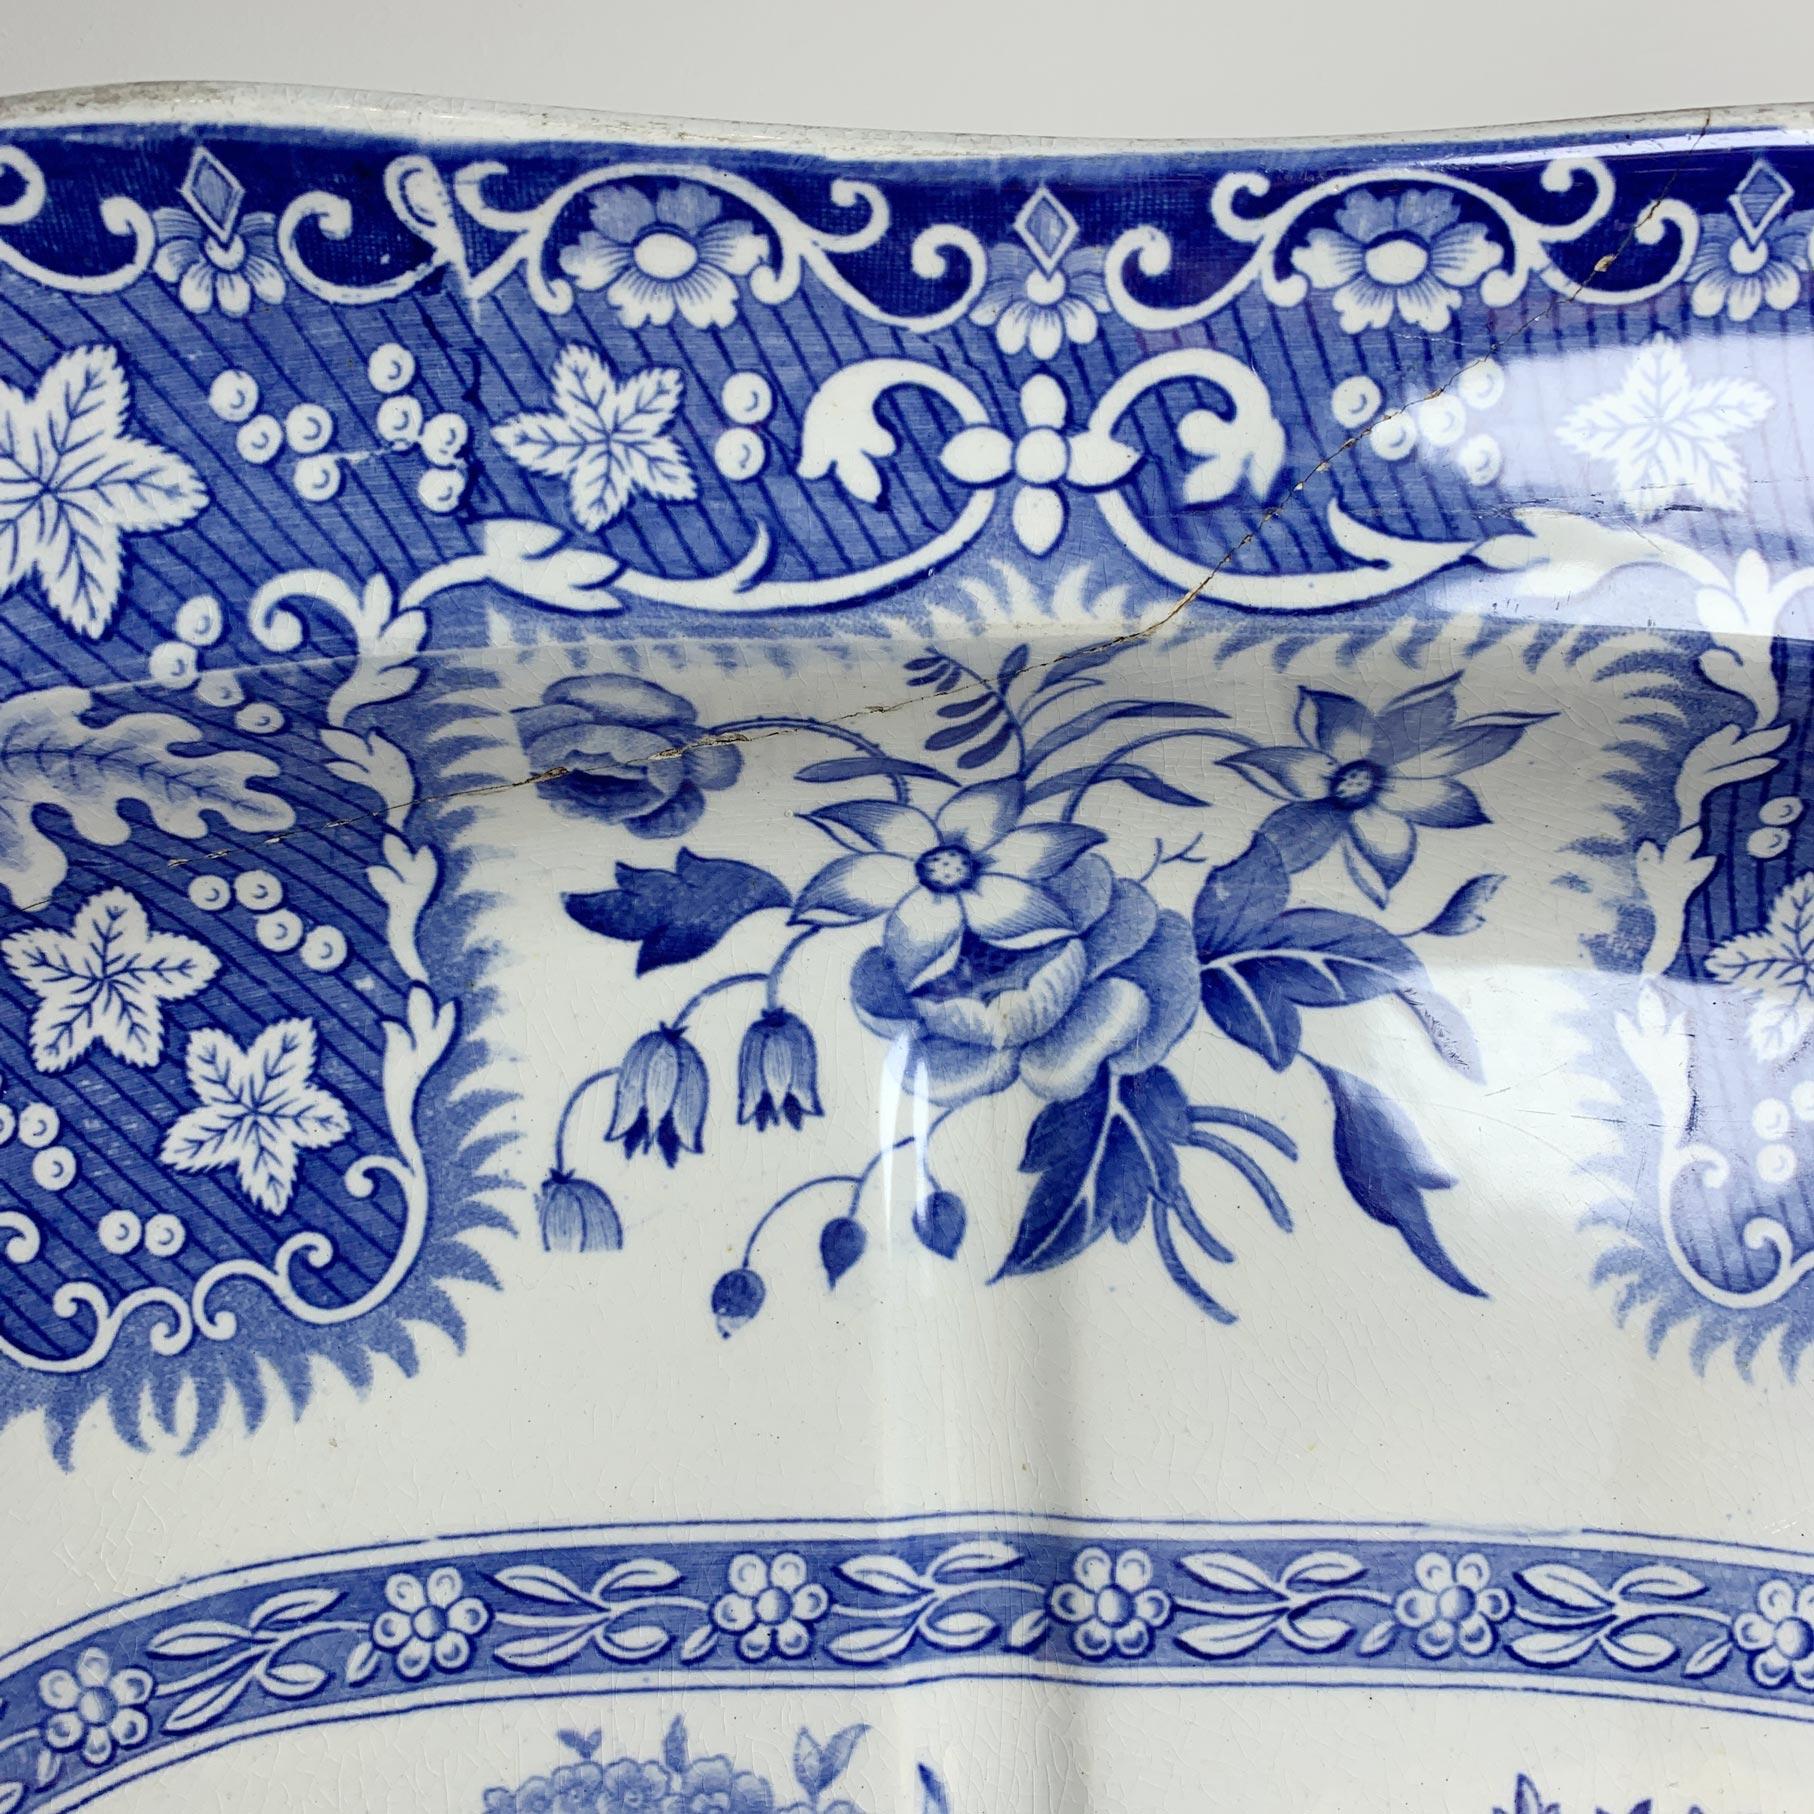  Copeland & Garrett Late Spode Blue and White Filigree Pattern Platter In Good Condition For Sale In Hastings, GB